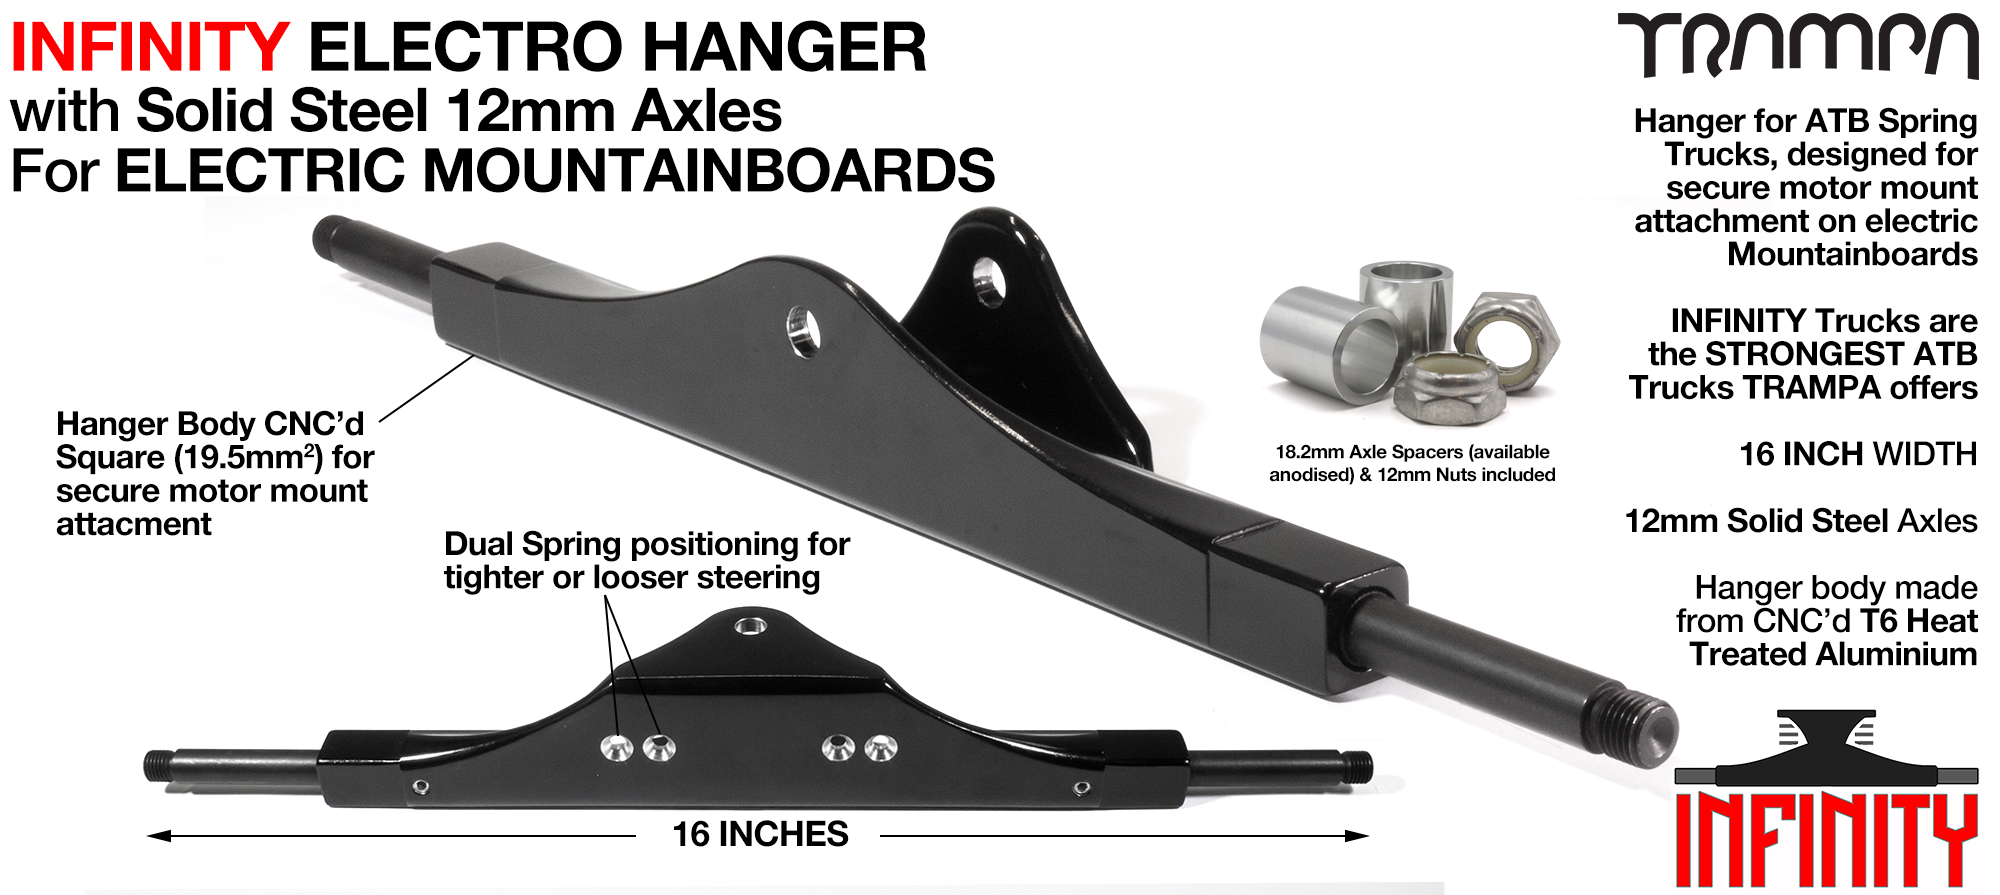 CNC Precision INFINITY E-MTB Hanger - Used in conjunction with all PRO Series Mountainboard Motor Mounts - 16 inch wide 